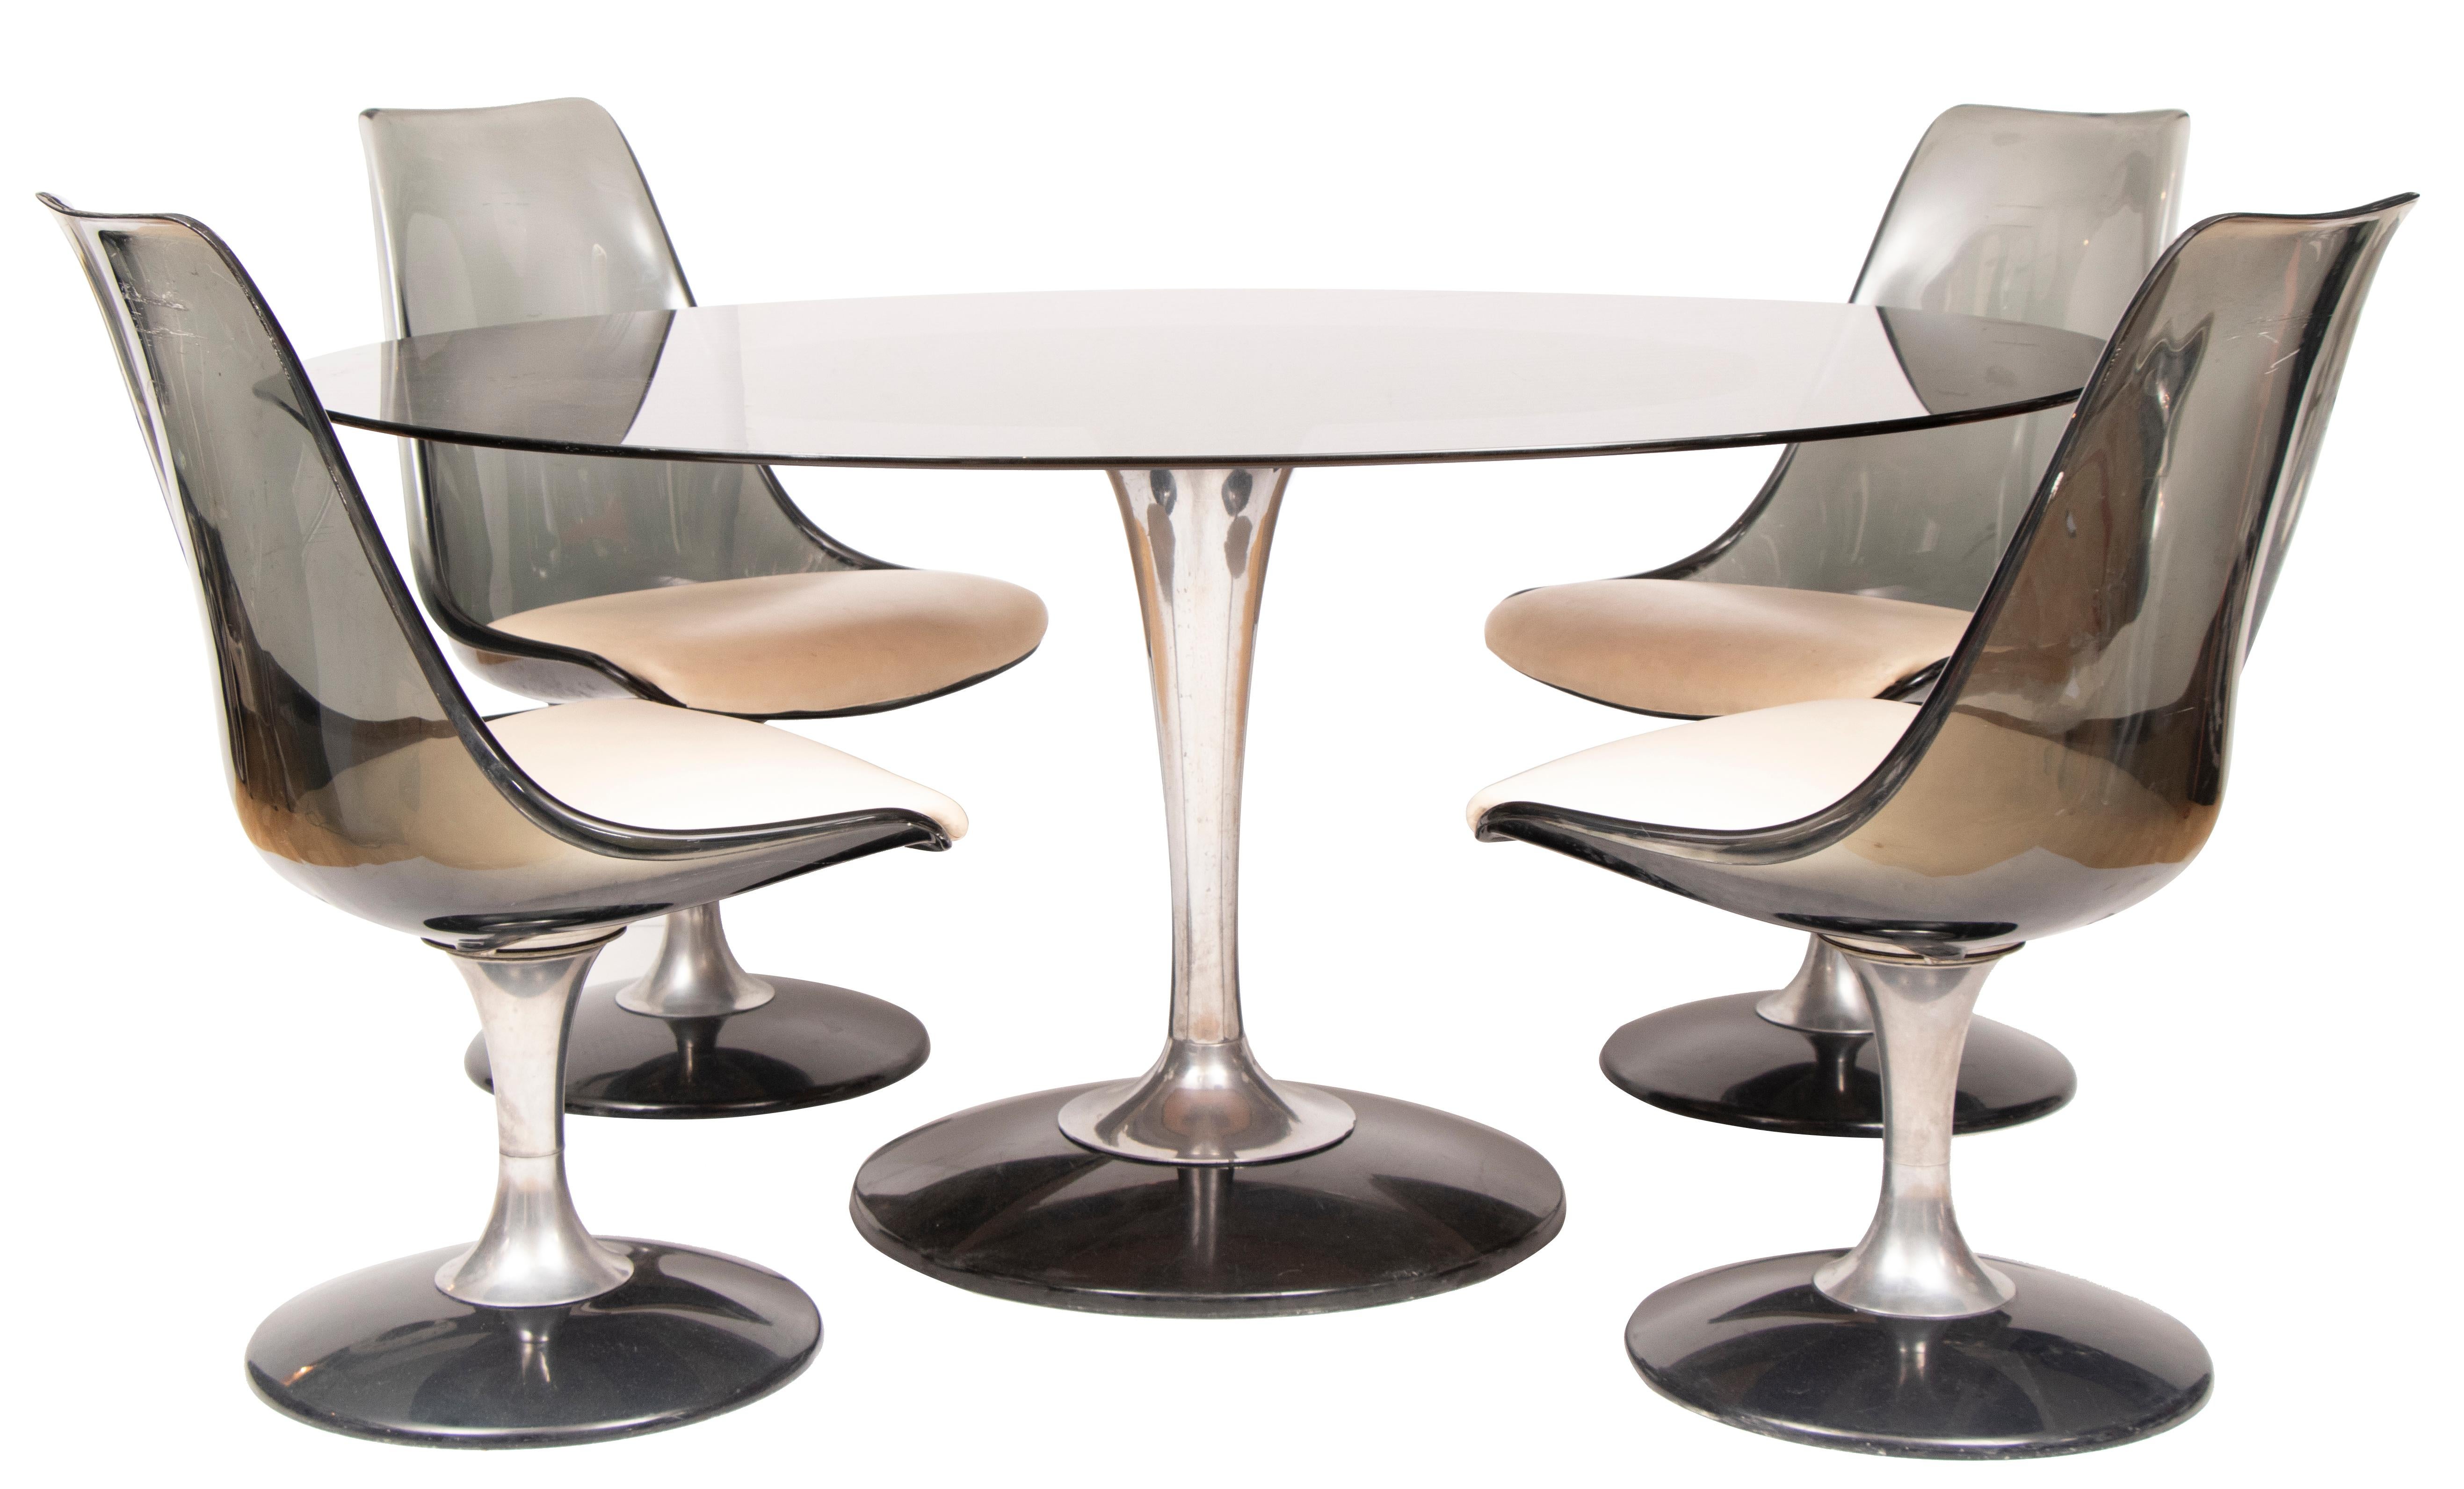 1970s chomcraft dining room set with an oval table top and four matching swivel tulip chairs. The tulip table has a thick smoked glass top, aluminium stem and smoked lucite base. The formed, organic-shaped, smoky, lucite chairs match the base with